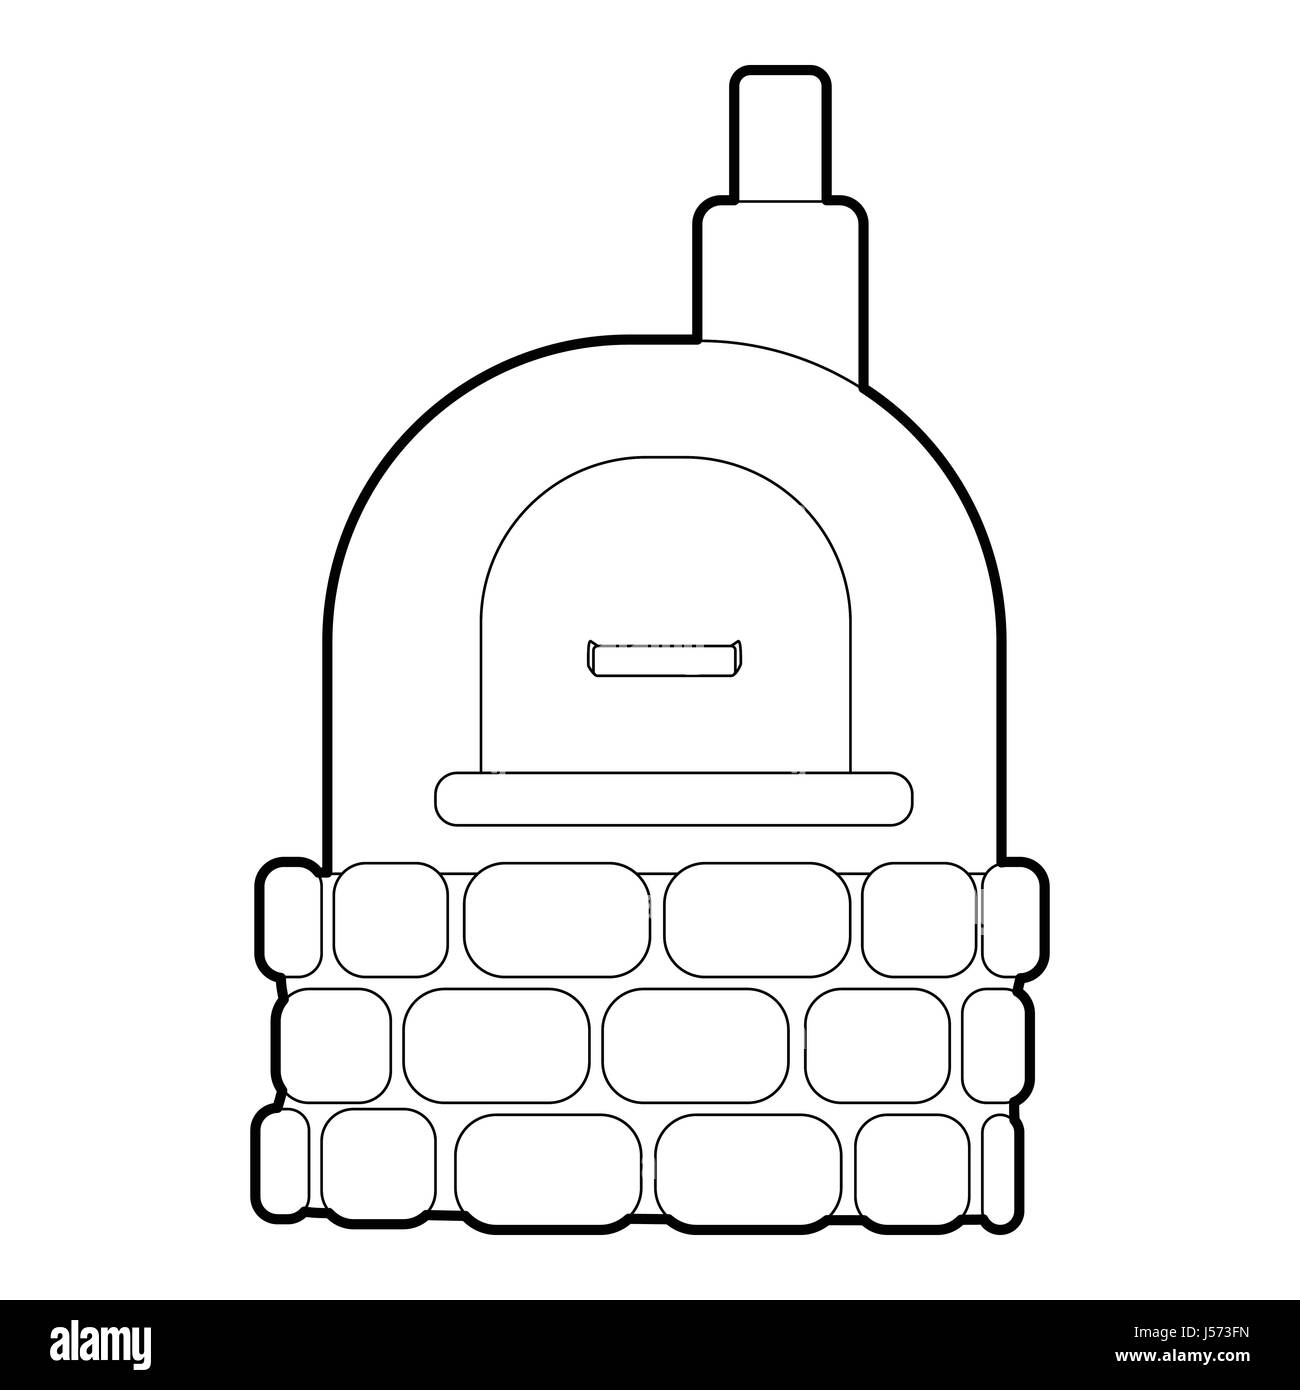 Oven icon, outline style Stock Vector